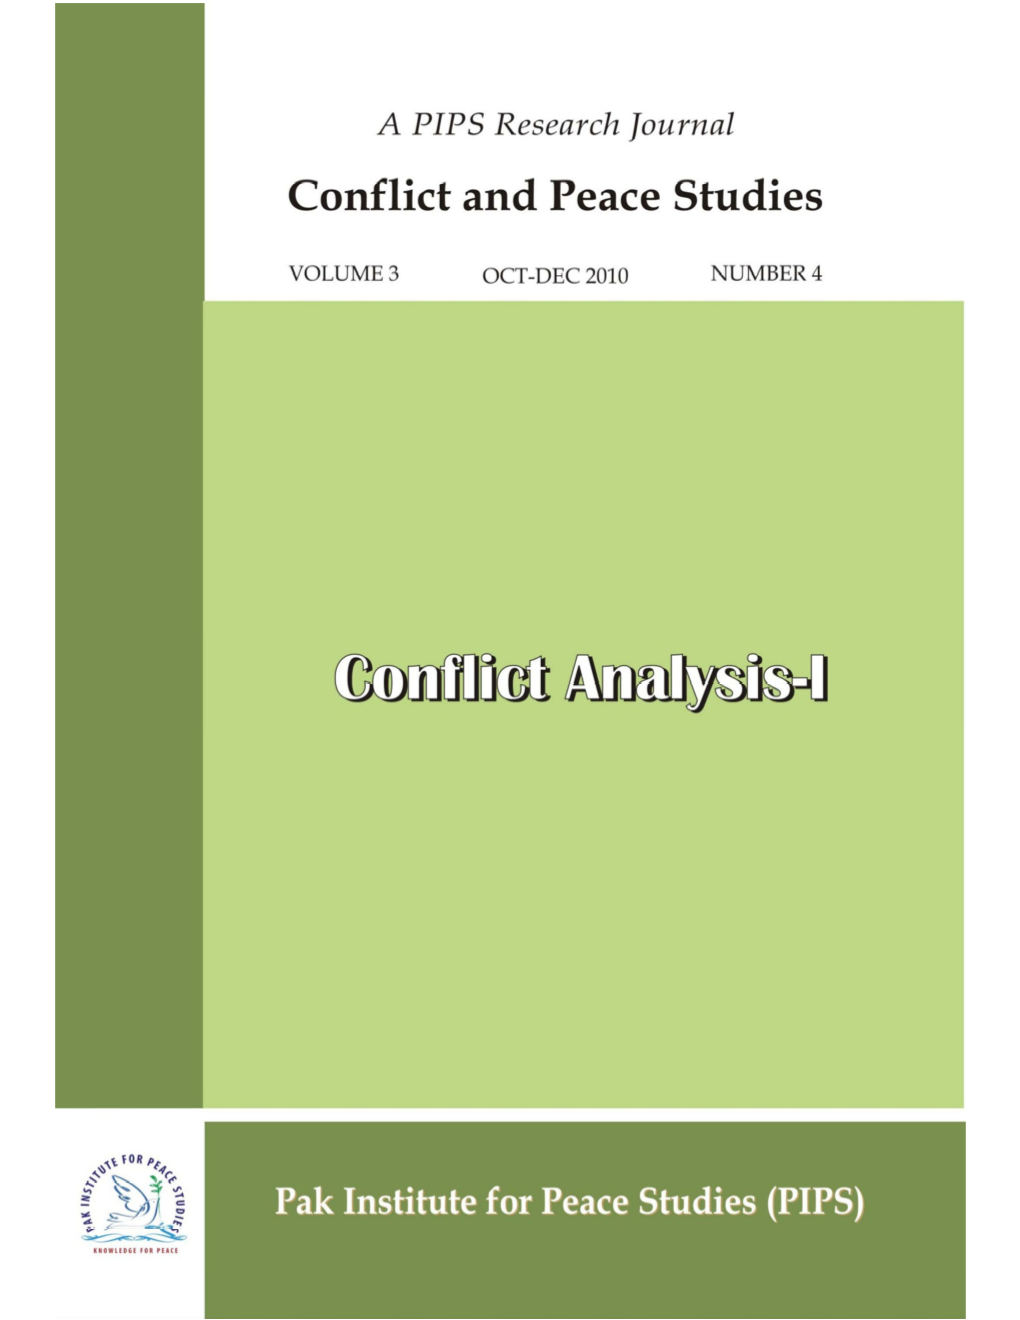 Conflict and Insecurity in Balochistan: Assessing Strategic Policy Options for Peace and Security